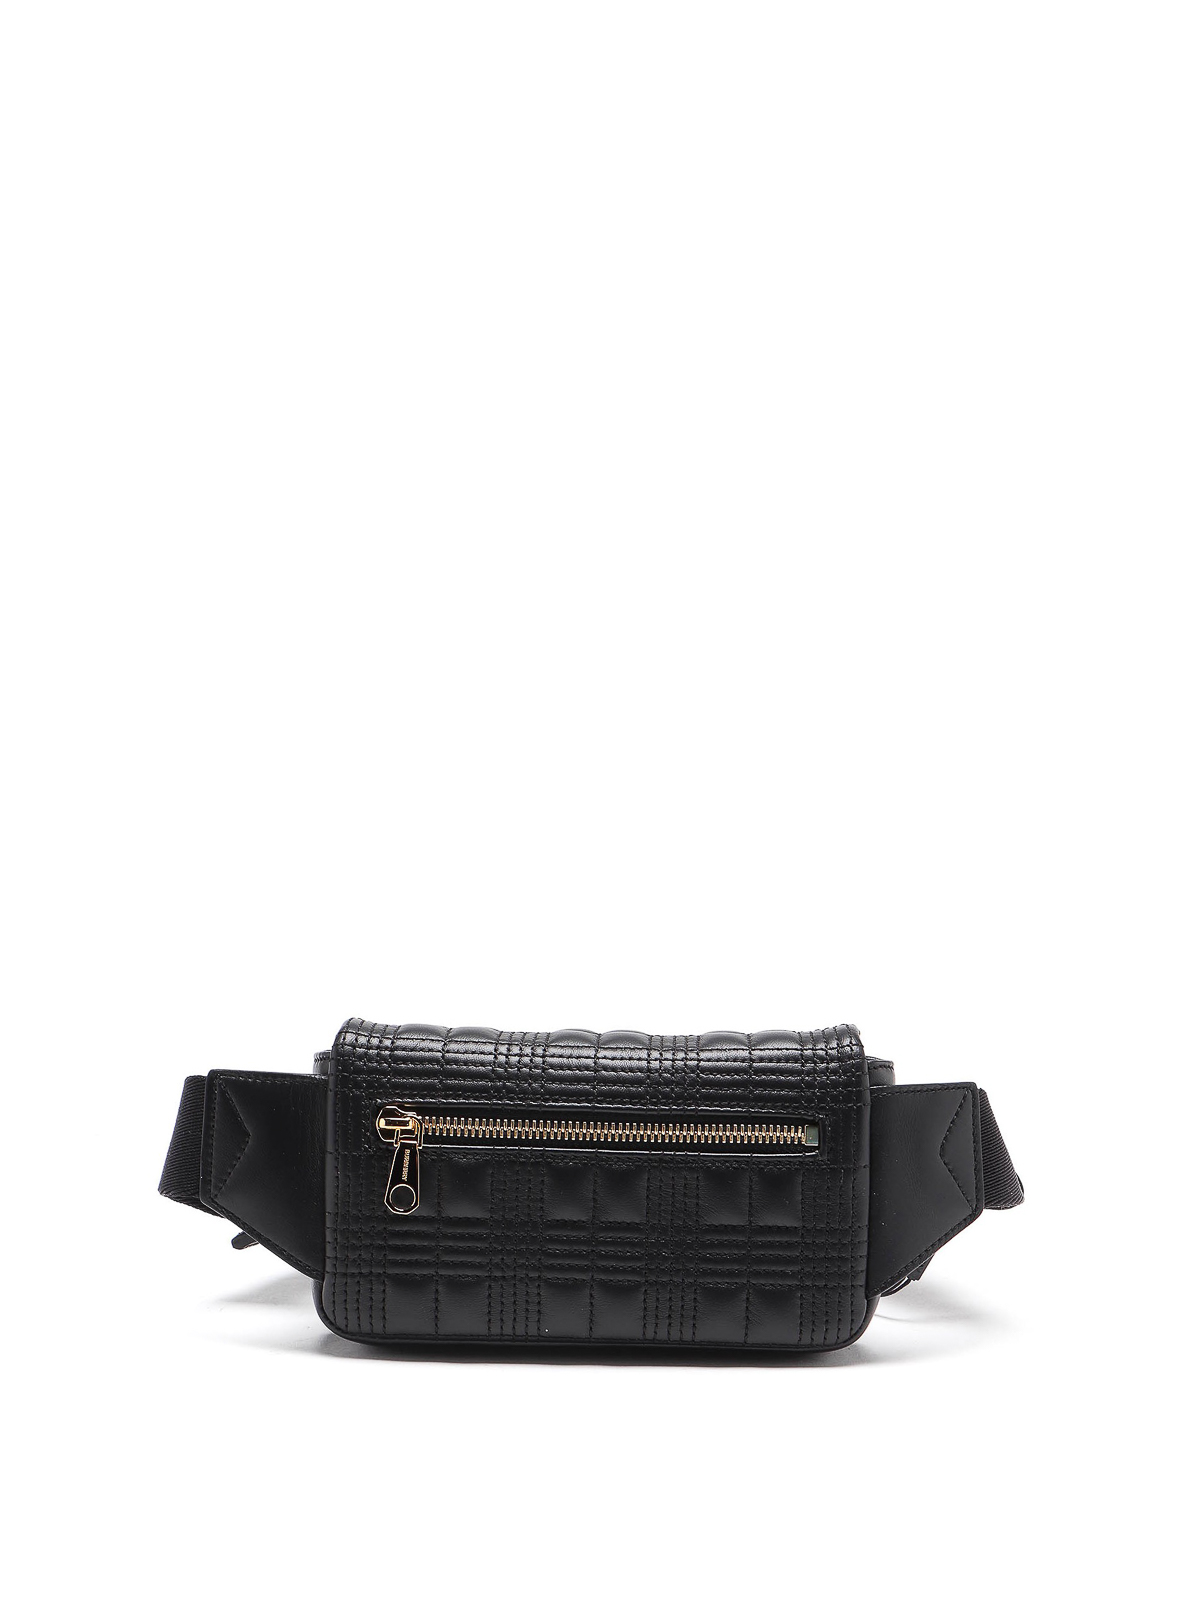 Burberry Quilted Lambskin Lola Bum Bag in Black